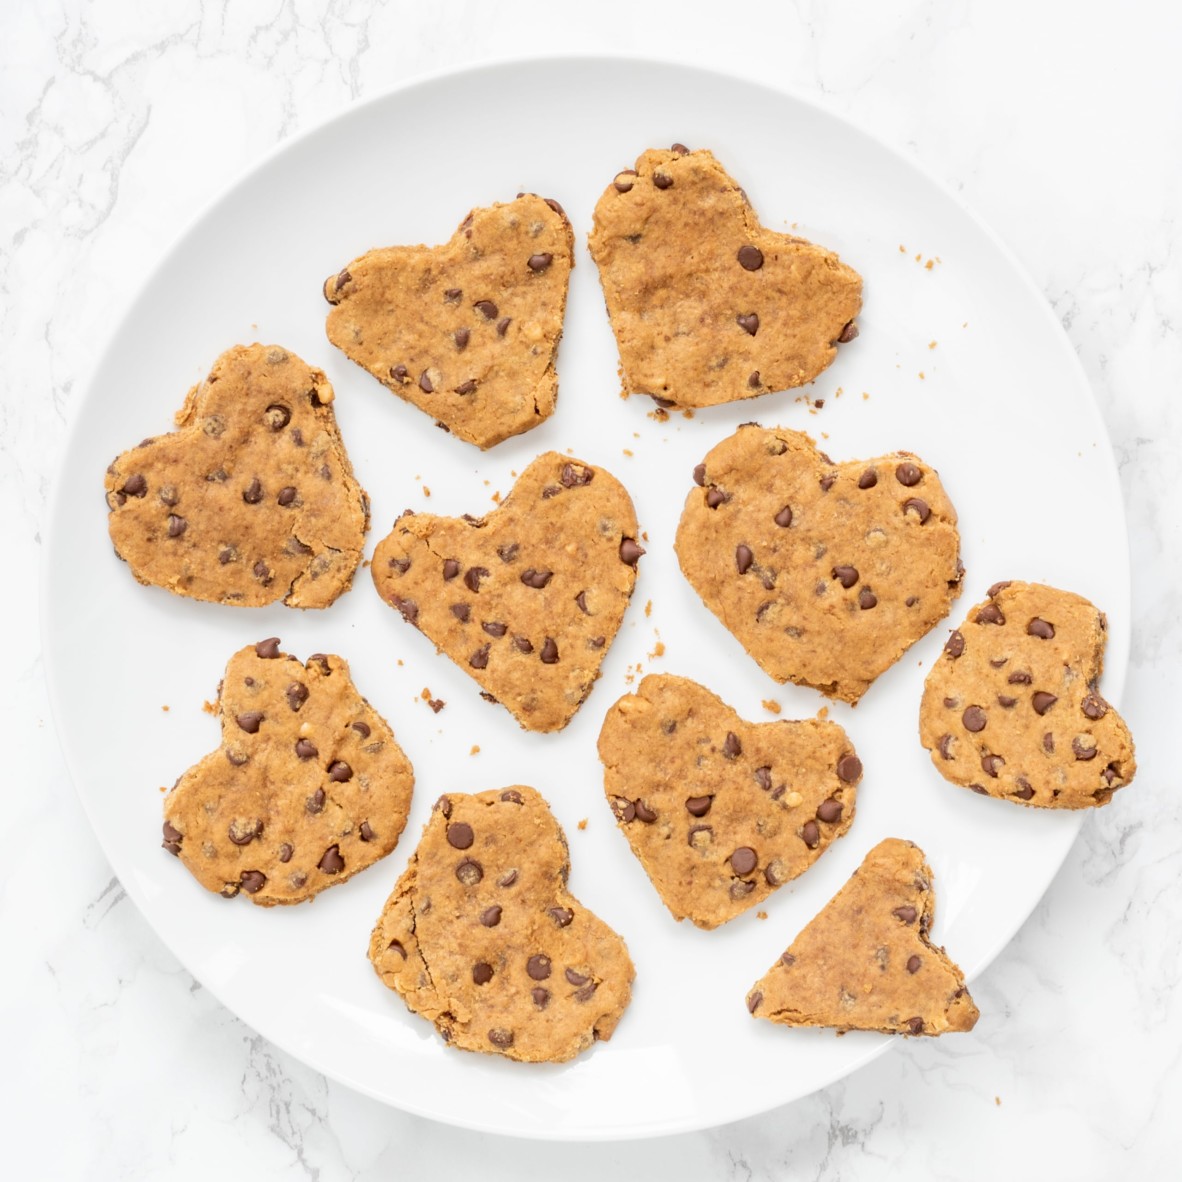 Peanut Butter Chocolate Chip Cookies (Vegan, Gluten-Free, Oil-Free) Featured Image